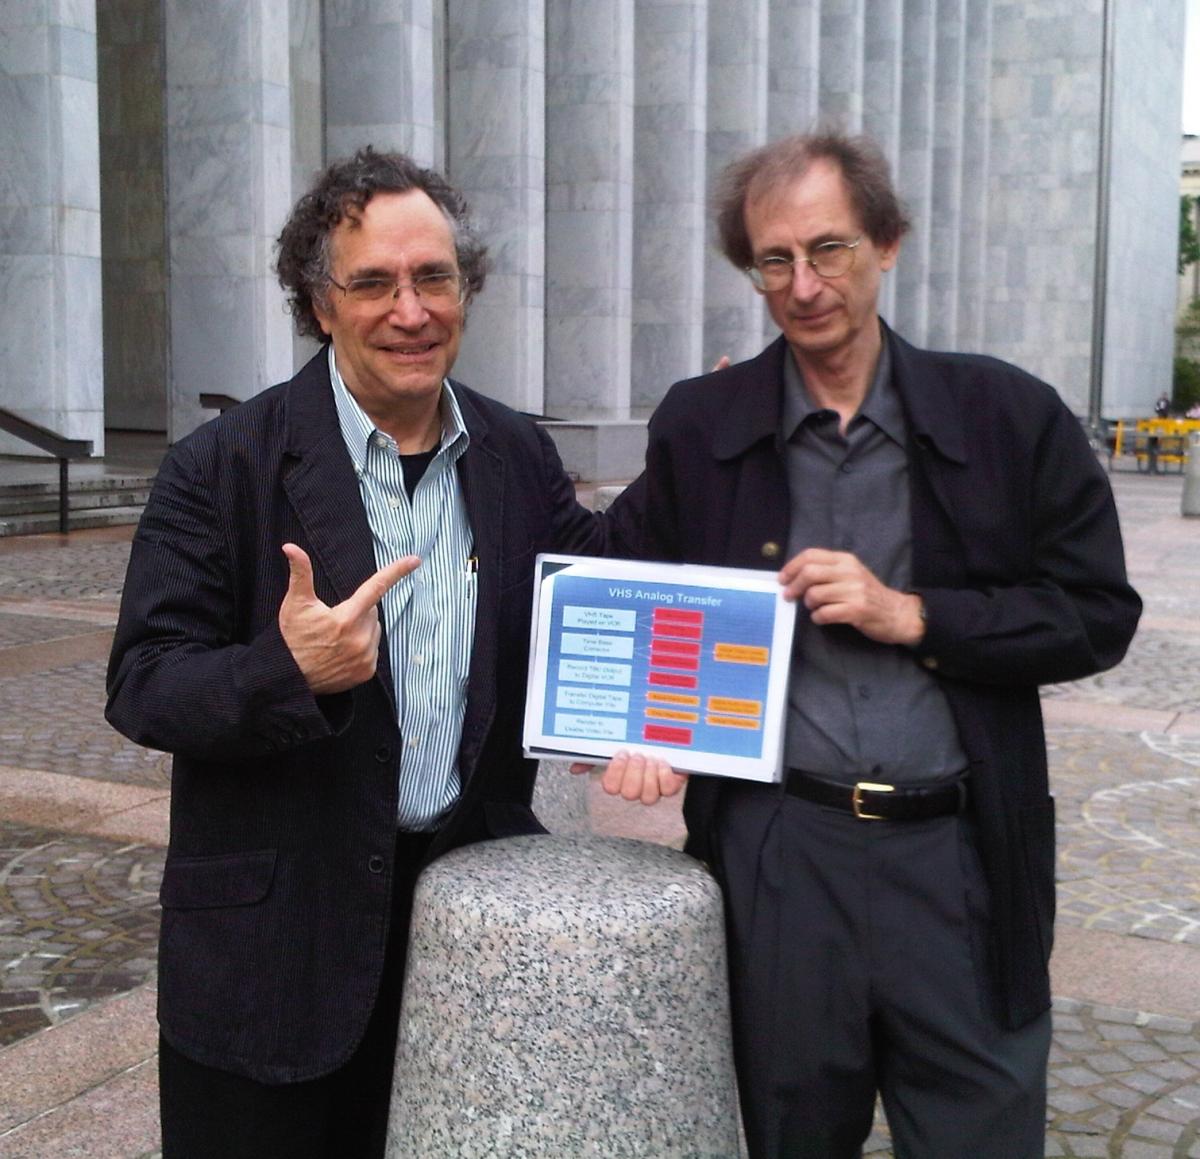 Gordon Quinn and Jim Morrisette of Kartemquin Films at the Library of Congress in May 2009